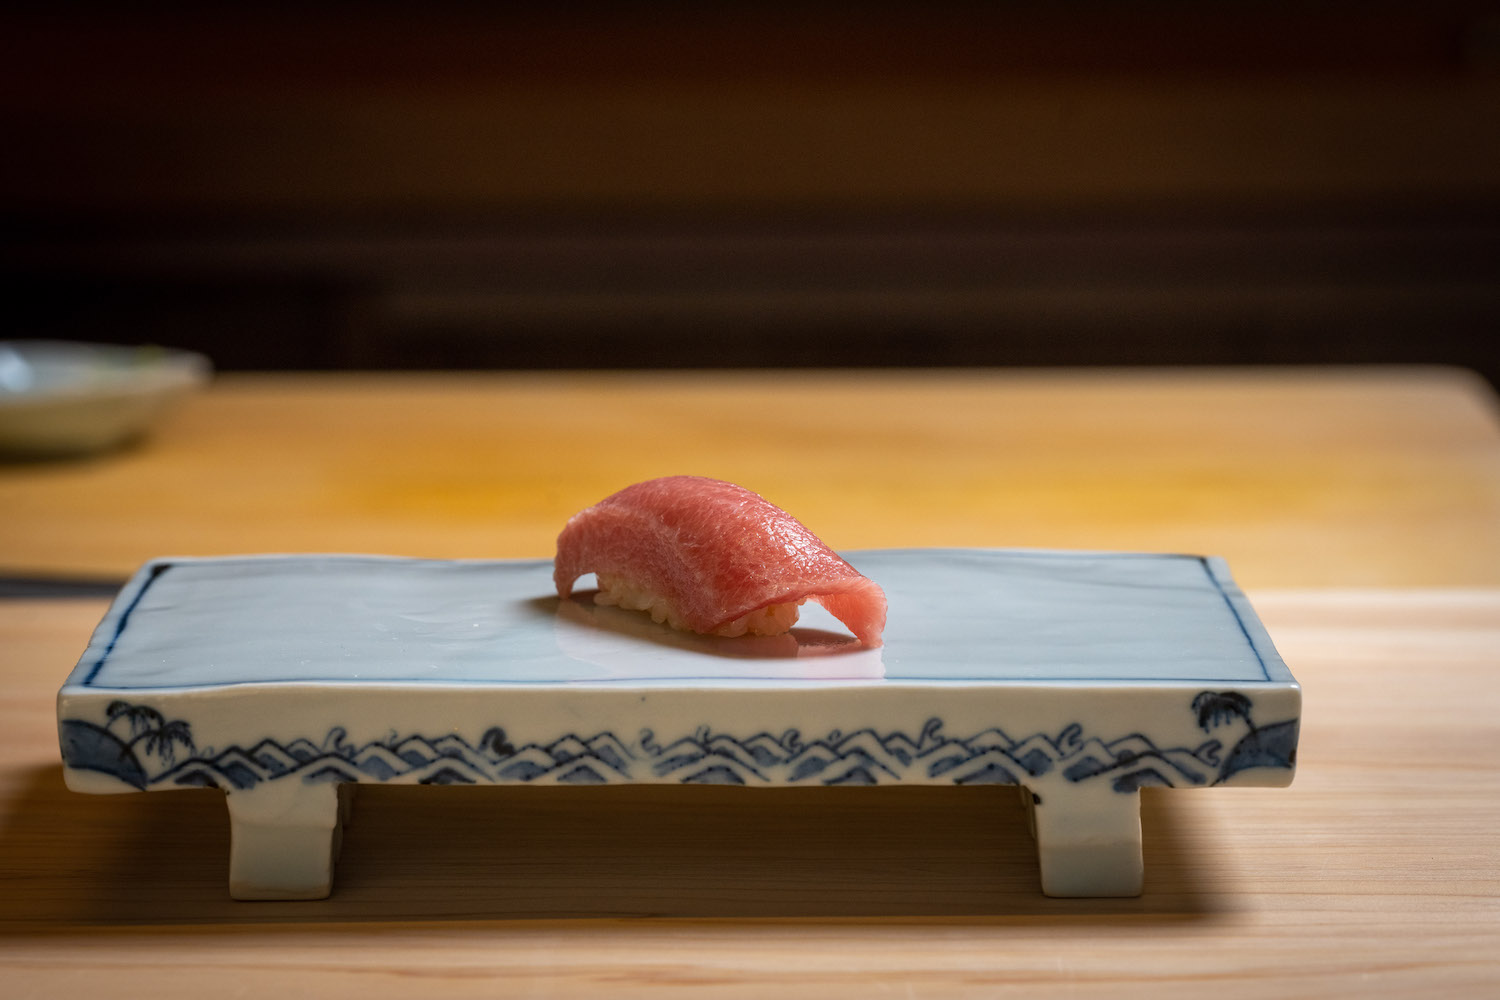 Nigiri by itself on a small plate